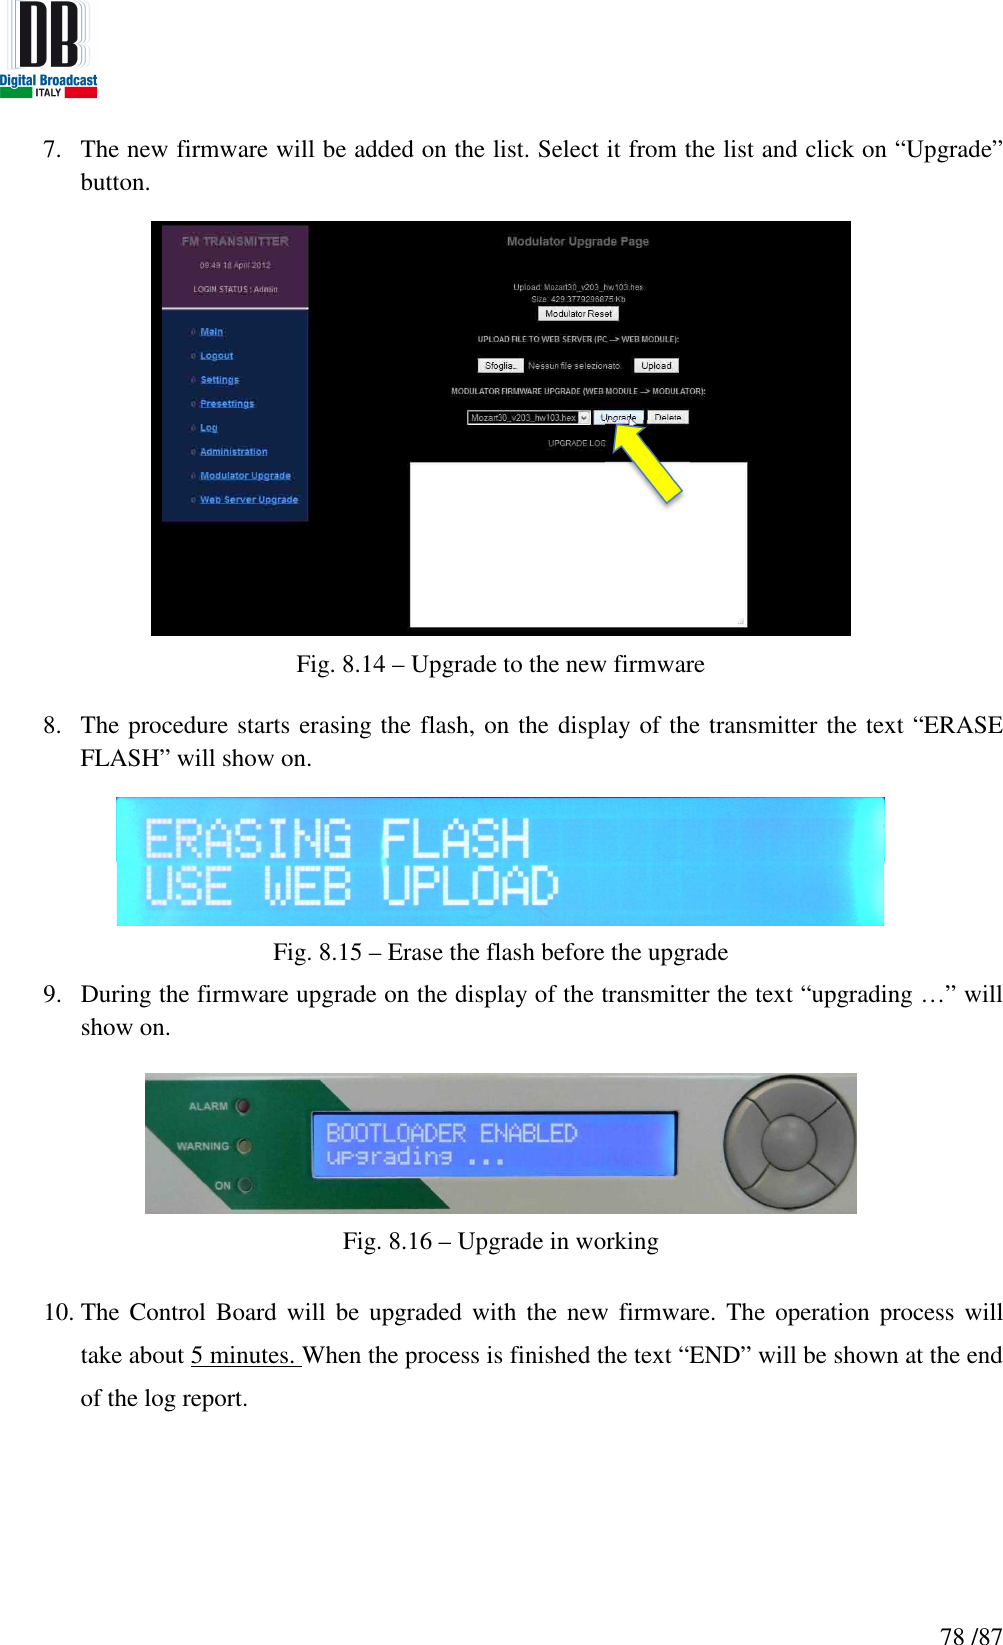   78 /87 7. The new firmware will be added on the list. Select it from the list and click on “Upgrade” button.  Fig. 8.14 – Upgrade to the new firmware  8. The procedure starts erasing the flash, on the display of the transmitter the text “ERASE FLASH” will show on.  Fig. 8.15 – Erase the flash before the upgrade 9. During the firmware upgrade on the display of the transmitter the text “upgrading …” will show on.   Fig. 8.16 – Upgrade in working  10. The Control  Board  will be  upgraded with  the new firmware.  The operation  process will take about 5 minutes. When the process is finished the text “END” will be shown at the end of the log report. 